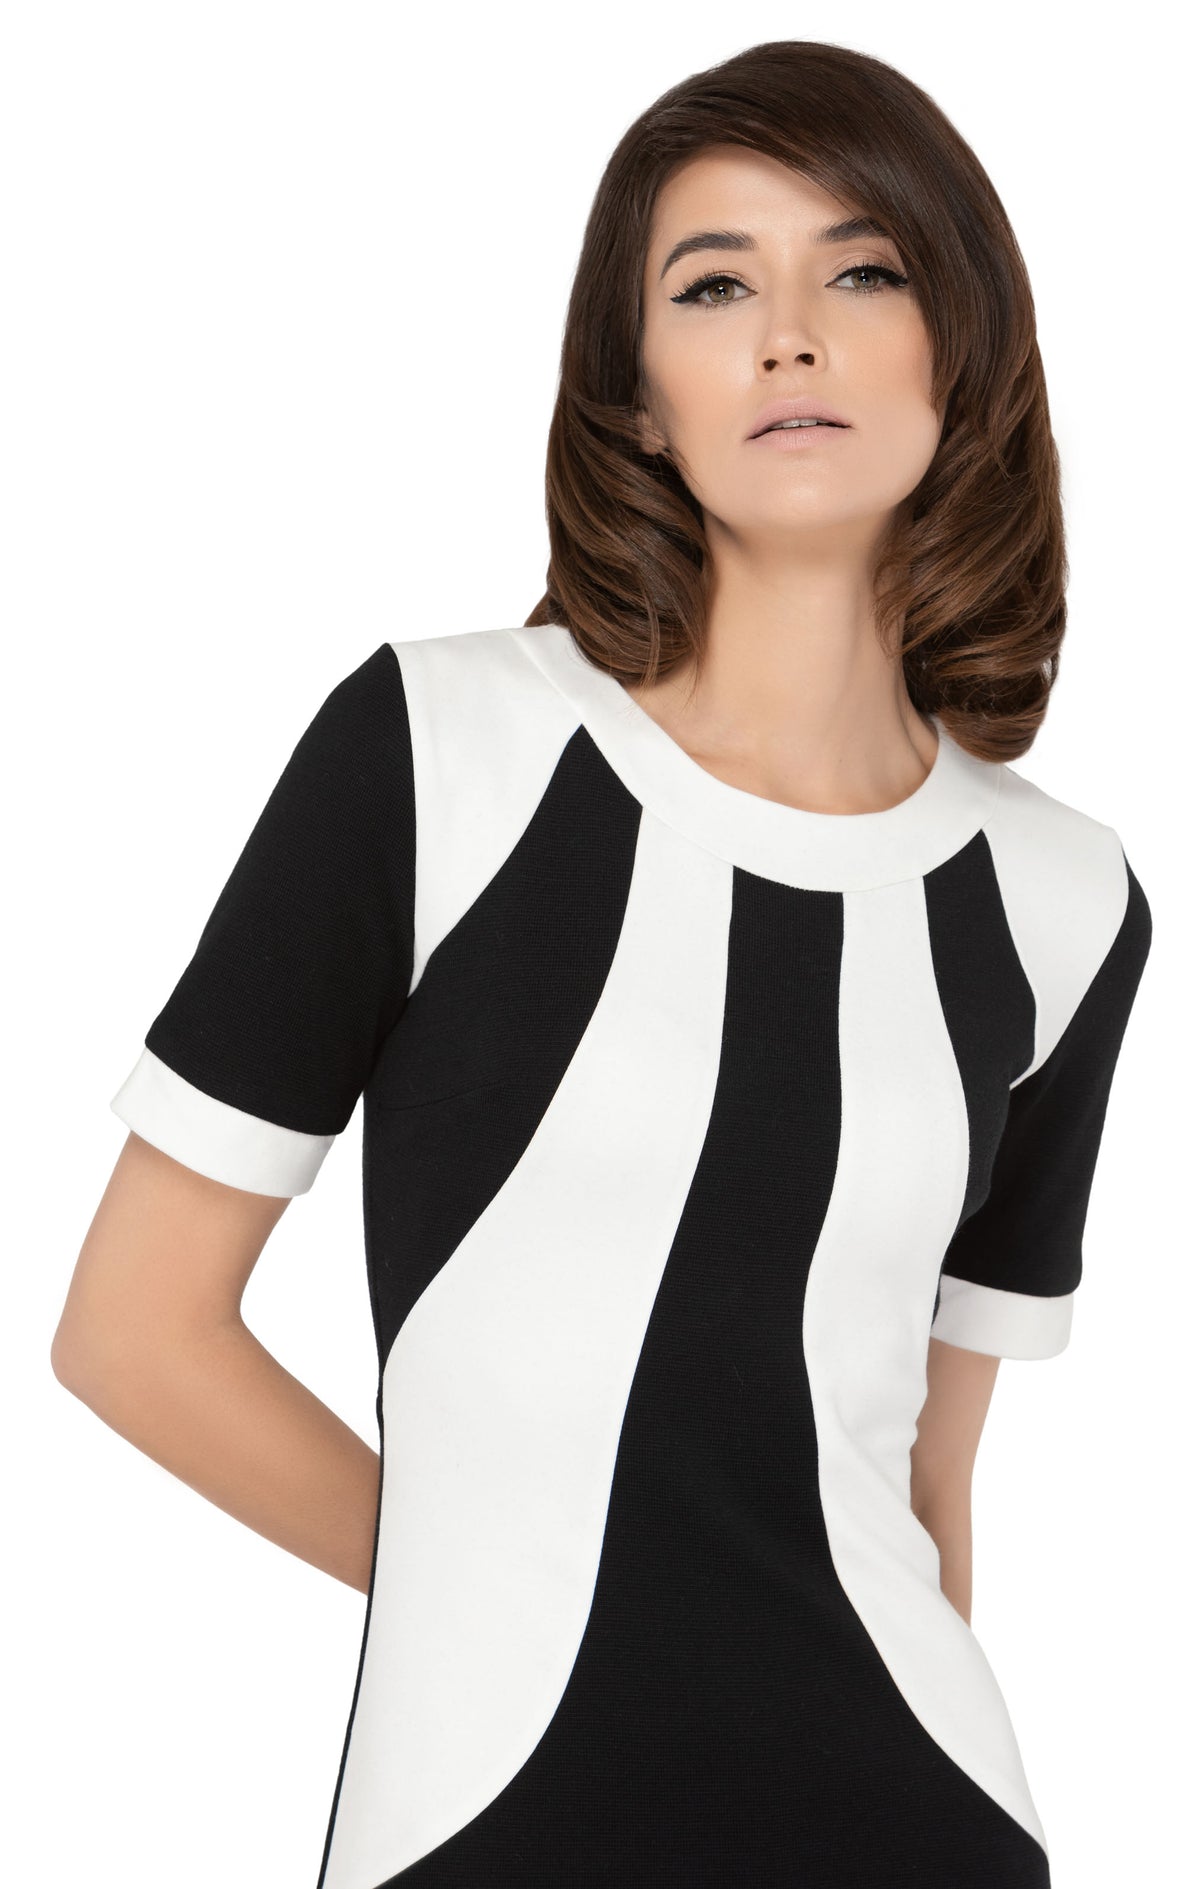 Italian medium-weight fitted wool jersey two tone dress with dramatic Atari detailing across the front torso. Detailing with a classic trim neckline and short sleeves.  Choose bespoke to alternate sleeve and hem length.